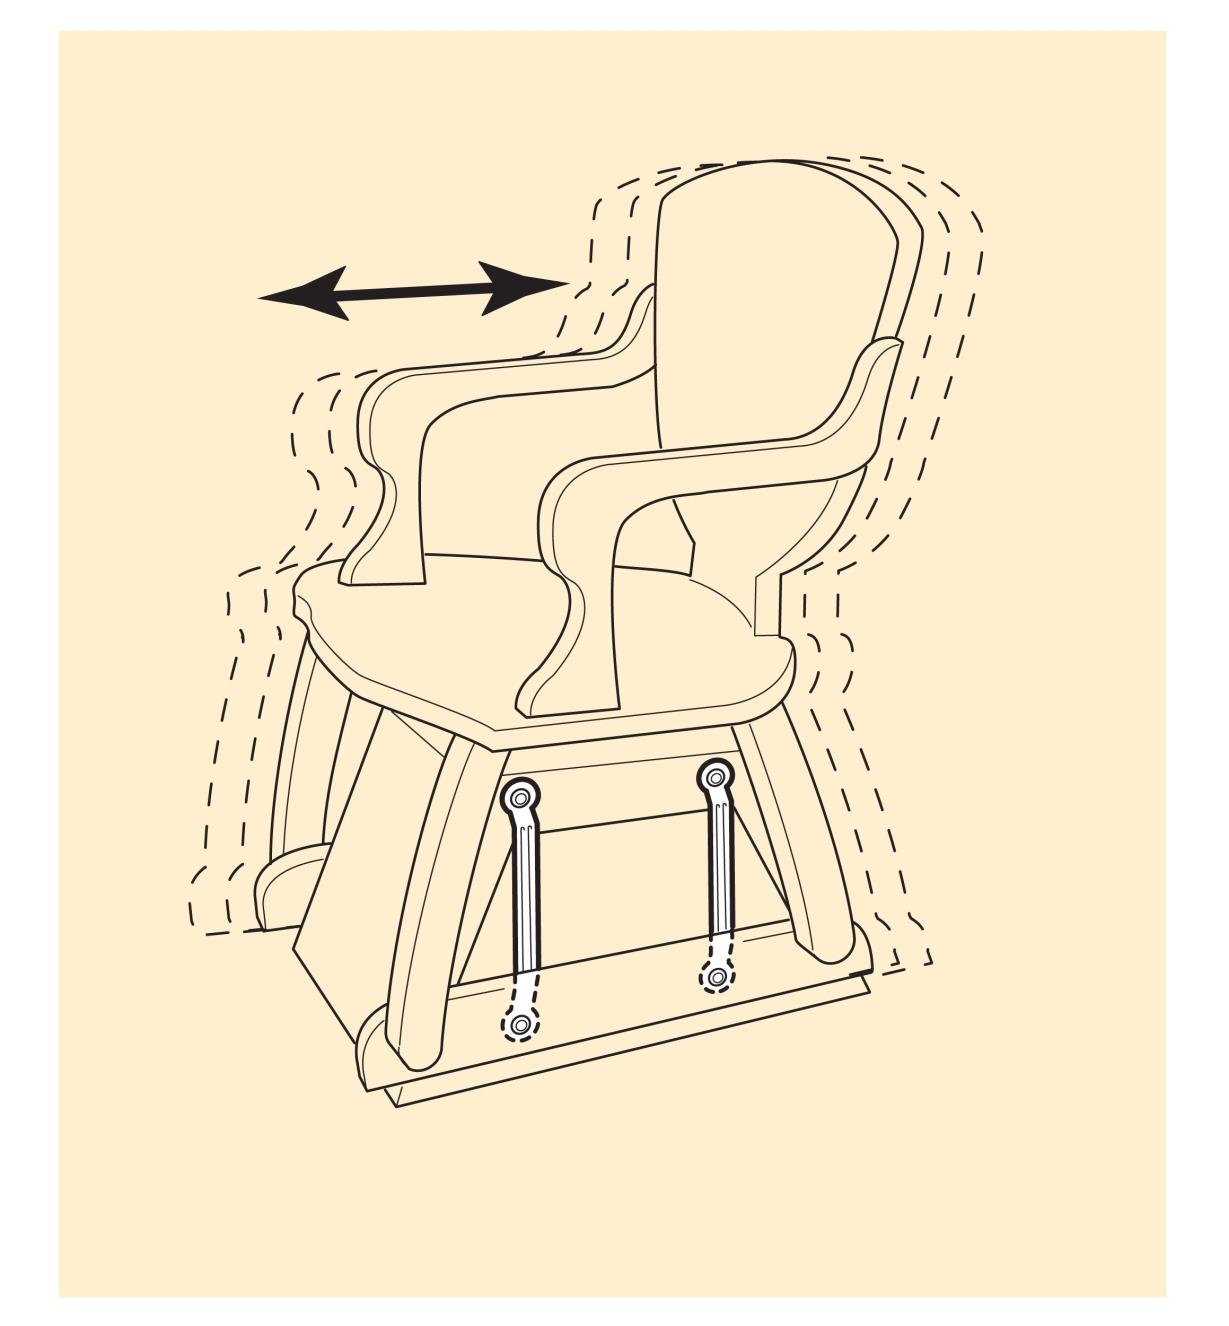 Illustration showing the back and forth motion of a glider chair